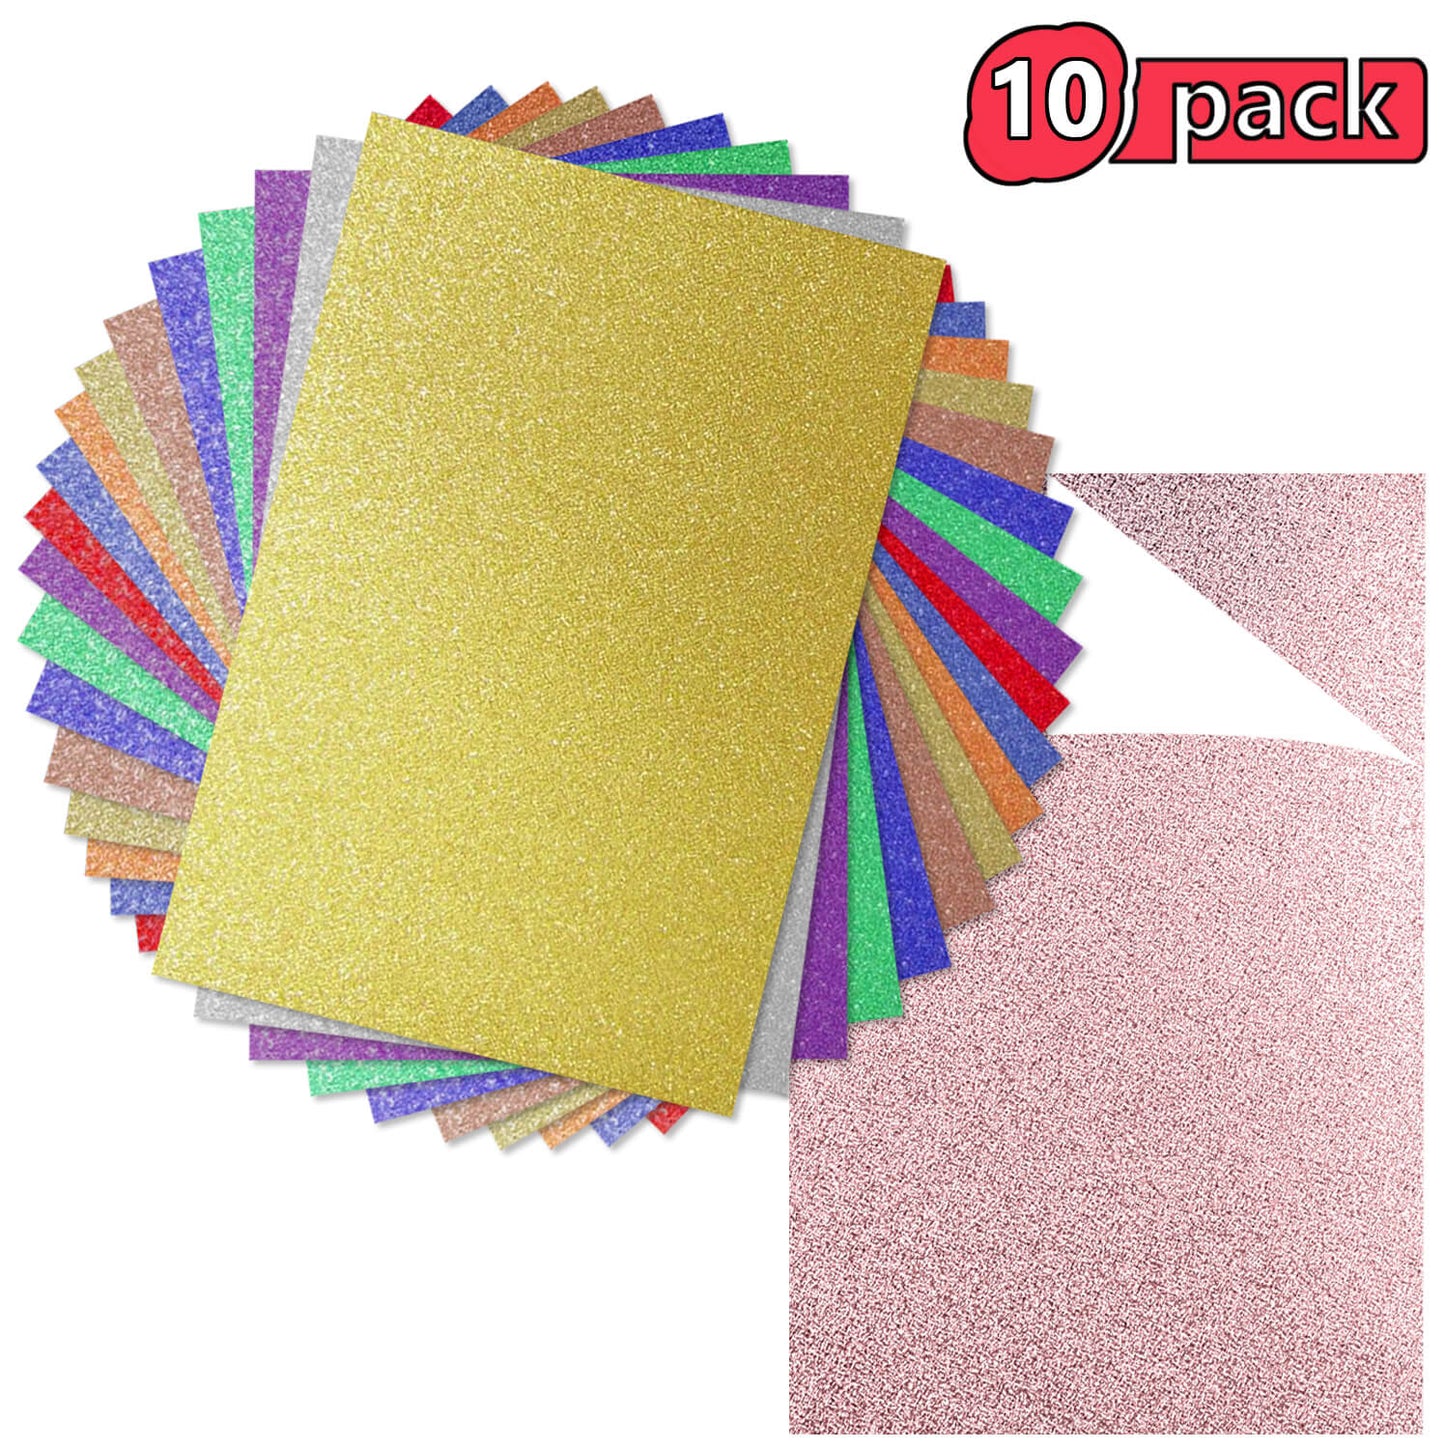 10 Pack - Variety A4